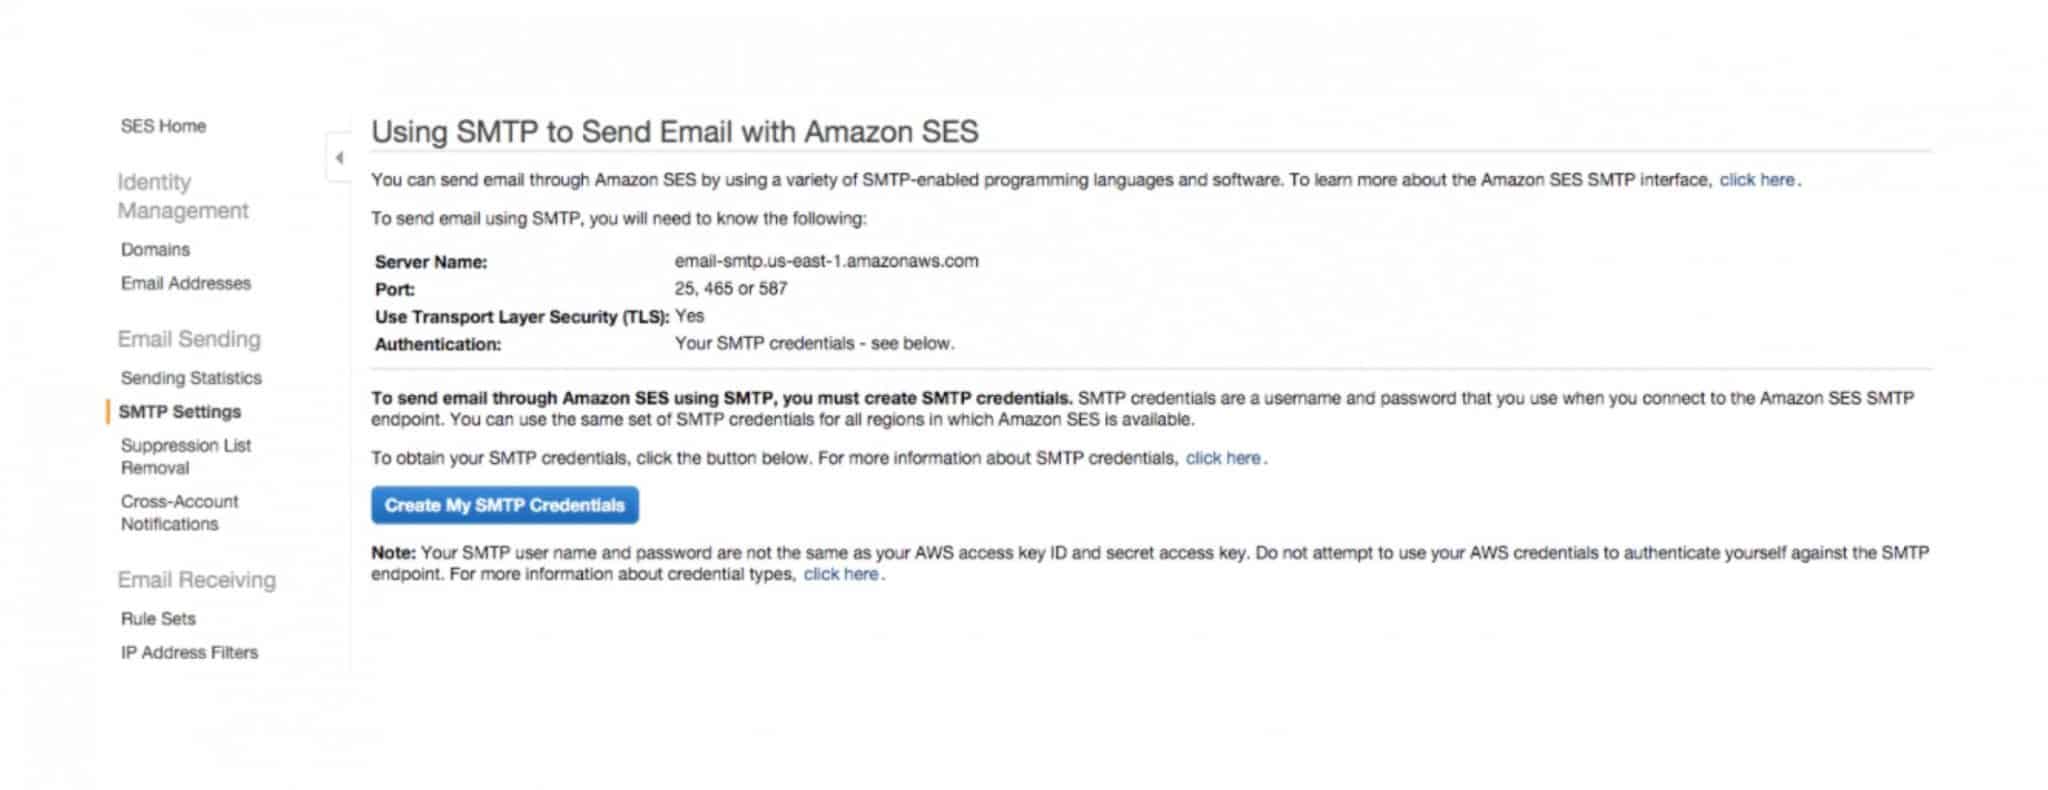 How to use Amazon Ses?